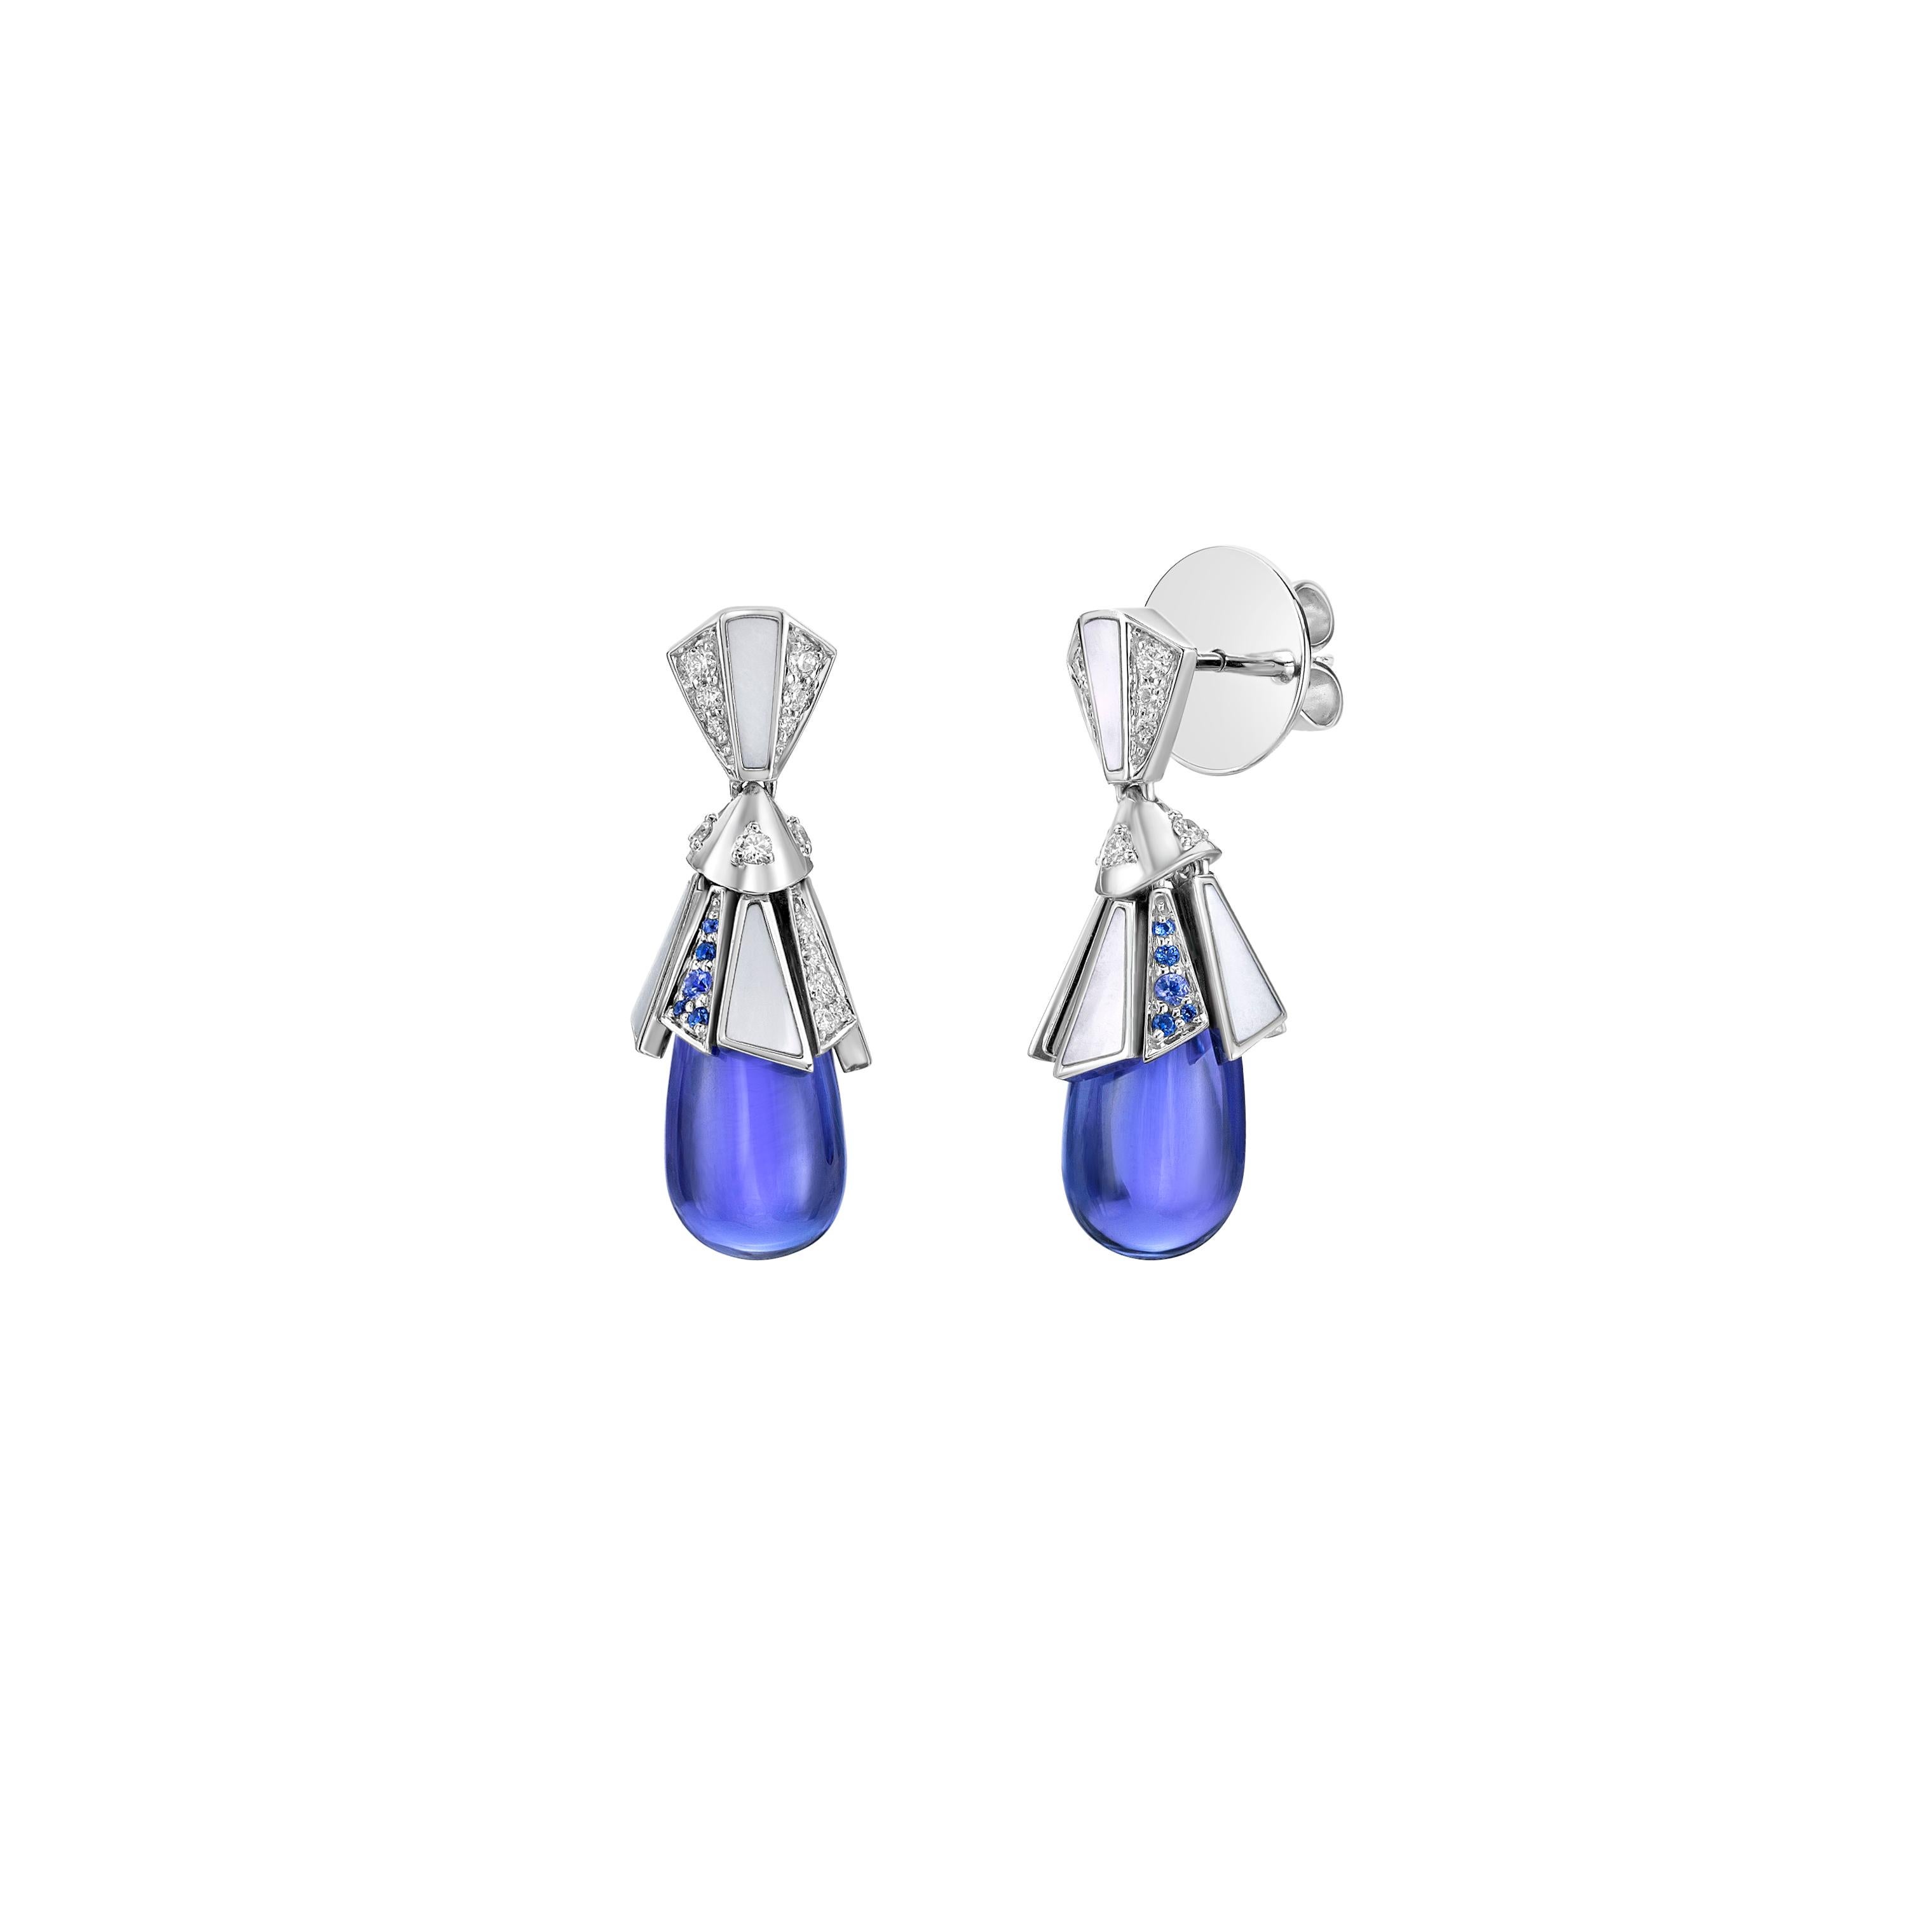 Mixed Cut 17.49 Carat Tanzanite Drop Earrings in 18KWG with Multi stones. For Sale